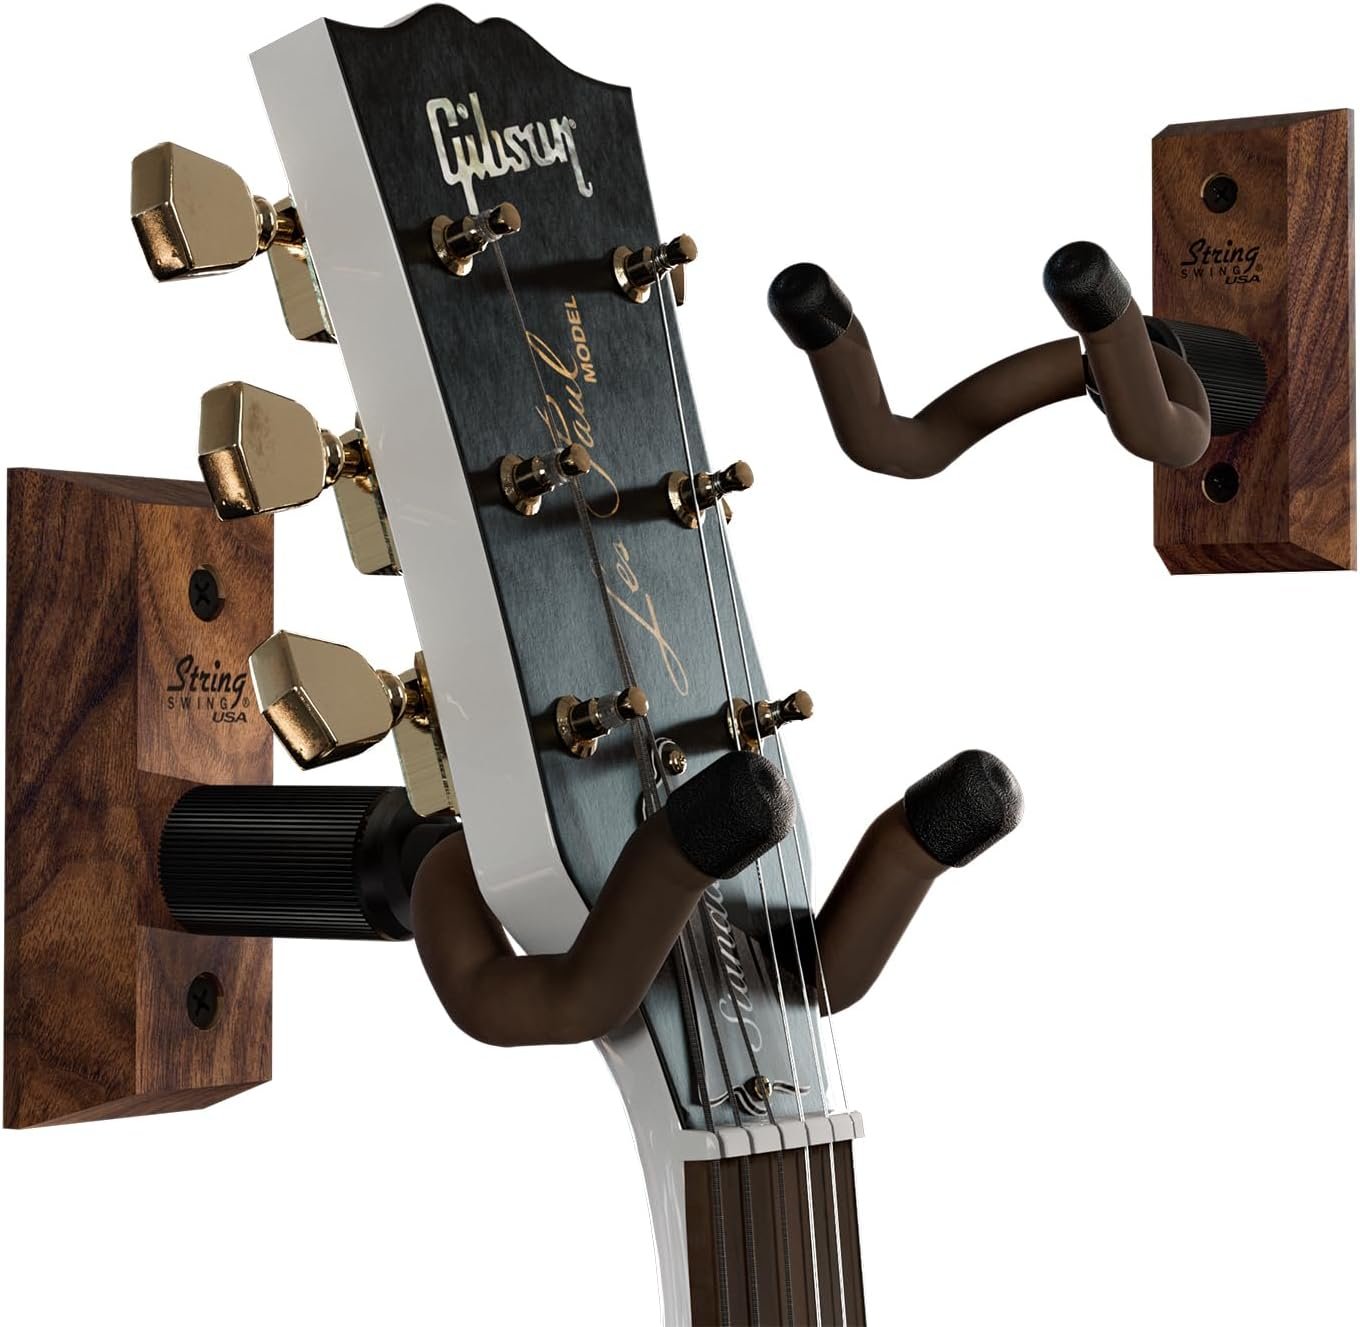 String Swing Guitar Wall Mount 2 Pack, Guitar Hangers, Wall Guitar Mount, Guitar Holder Hook for Wall, Fits All Size Guitars, Acoustic, Electric, Bass, Black Walnut Hardwood - Made in USA